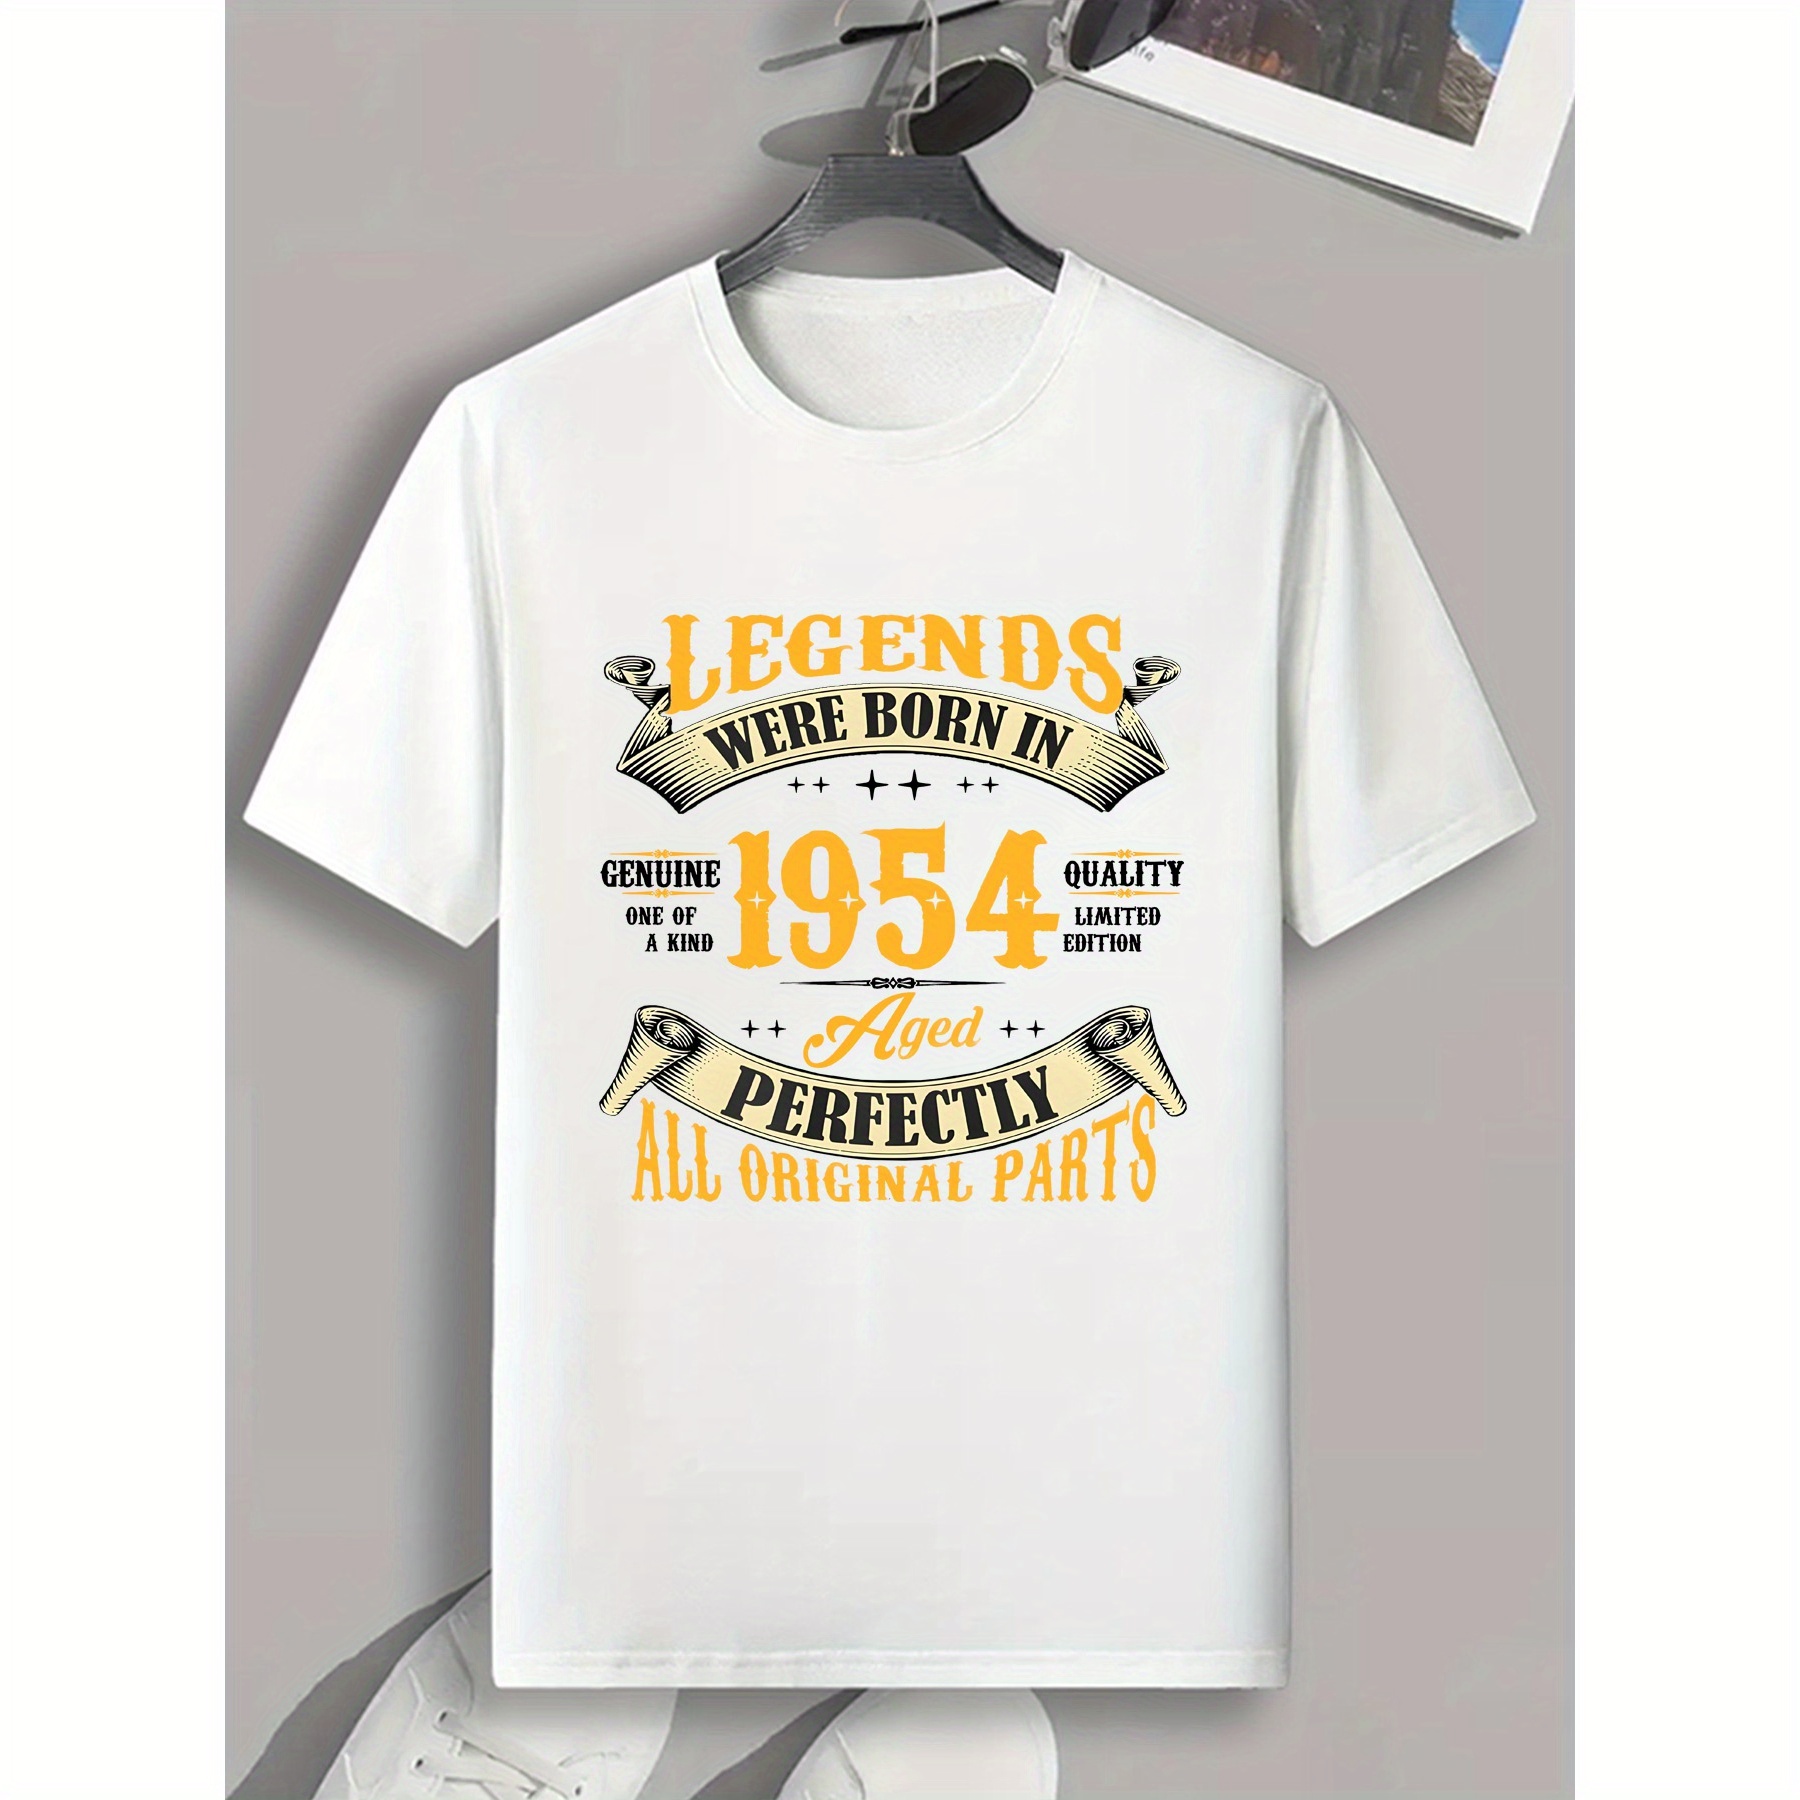 

Legends Were Born In 1954 Perfectly Al Original Parts Print, Men's Casual Round Neck Short Sleeve Outdoor T-shirt, Comfy Fit Top For Summer Wear